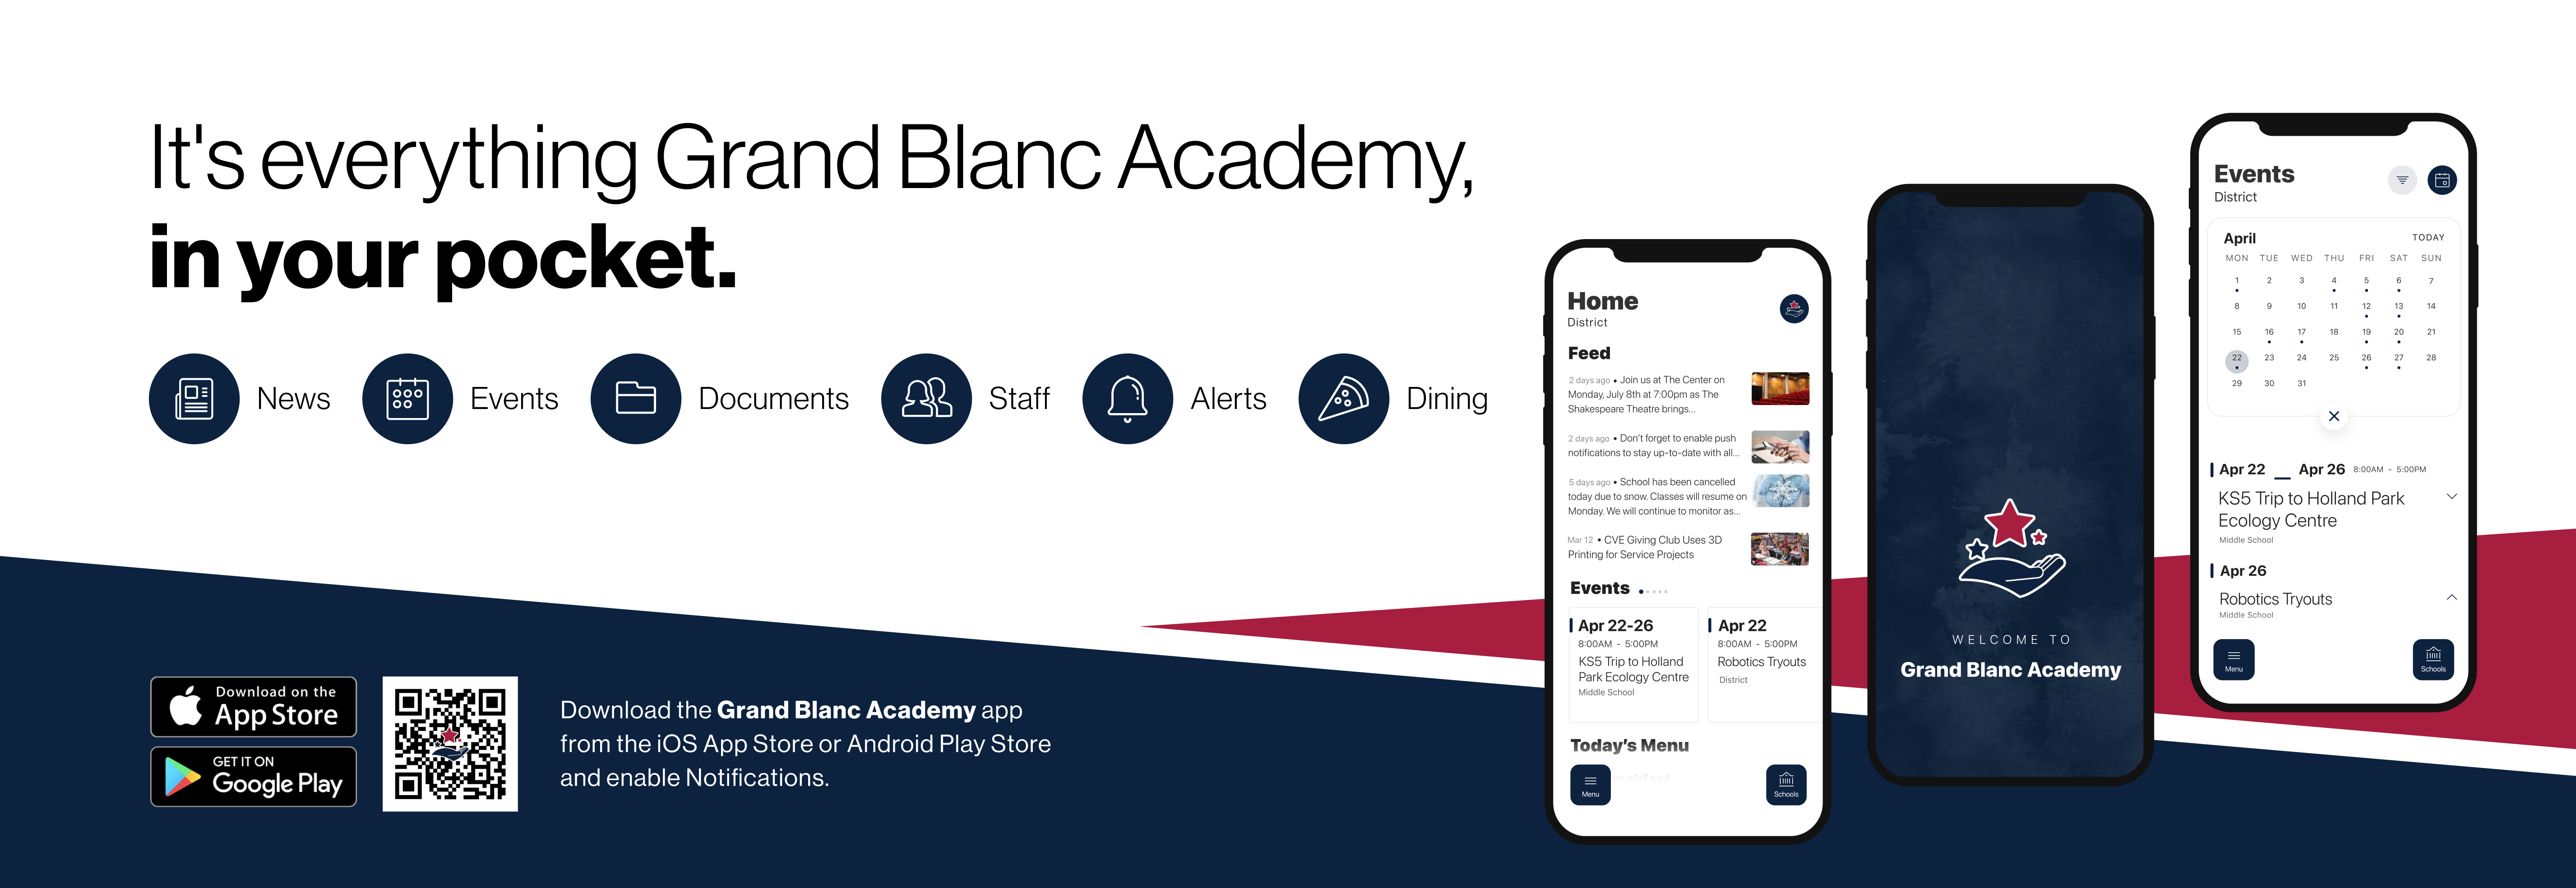 It's everything Grand Blanc Academy, in your pocket. News 188° Events F Documents Staff A Alerts | Dining Download on the App Store GET ITON Google Play Download the Grand Blanc Academy app from the iOS App Store or Android Play Store and enable Notifications.